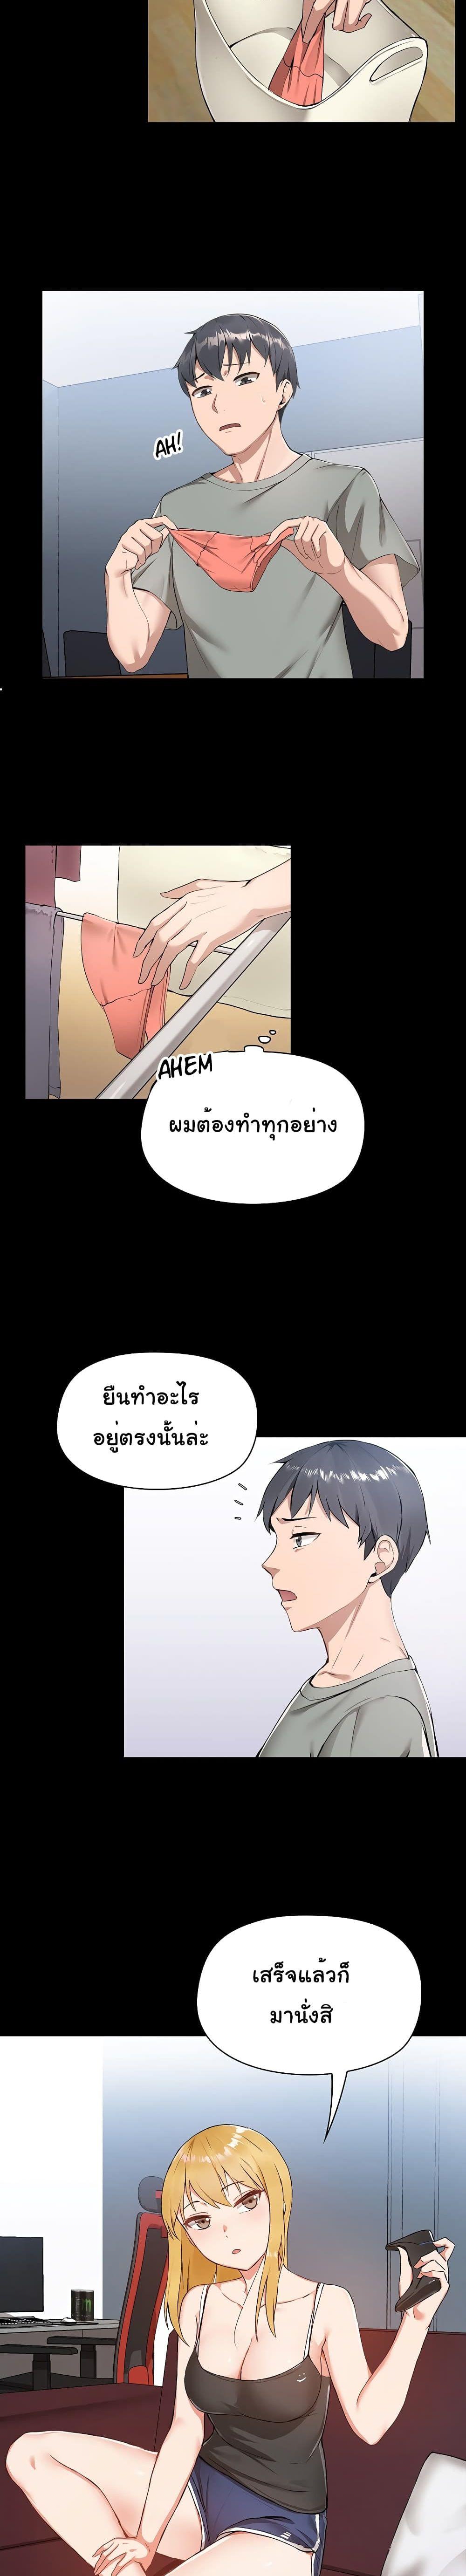 All About That Game Life 1 ภาพ 3